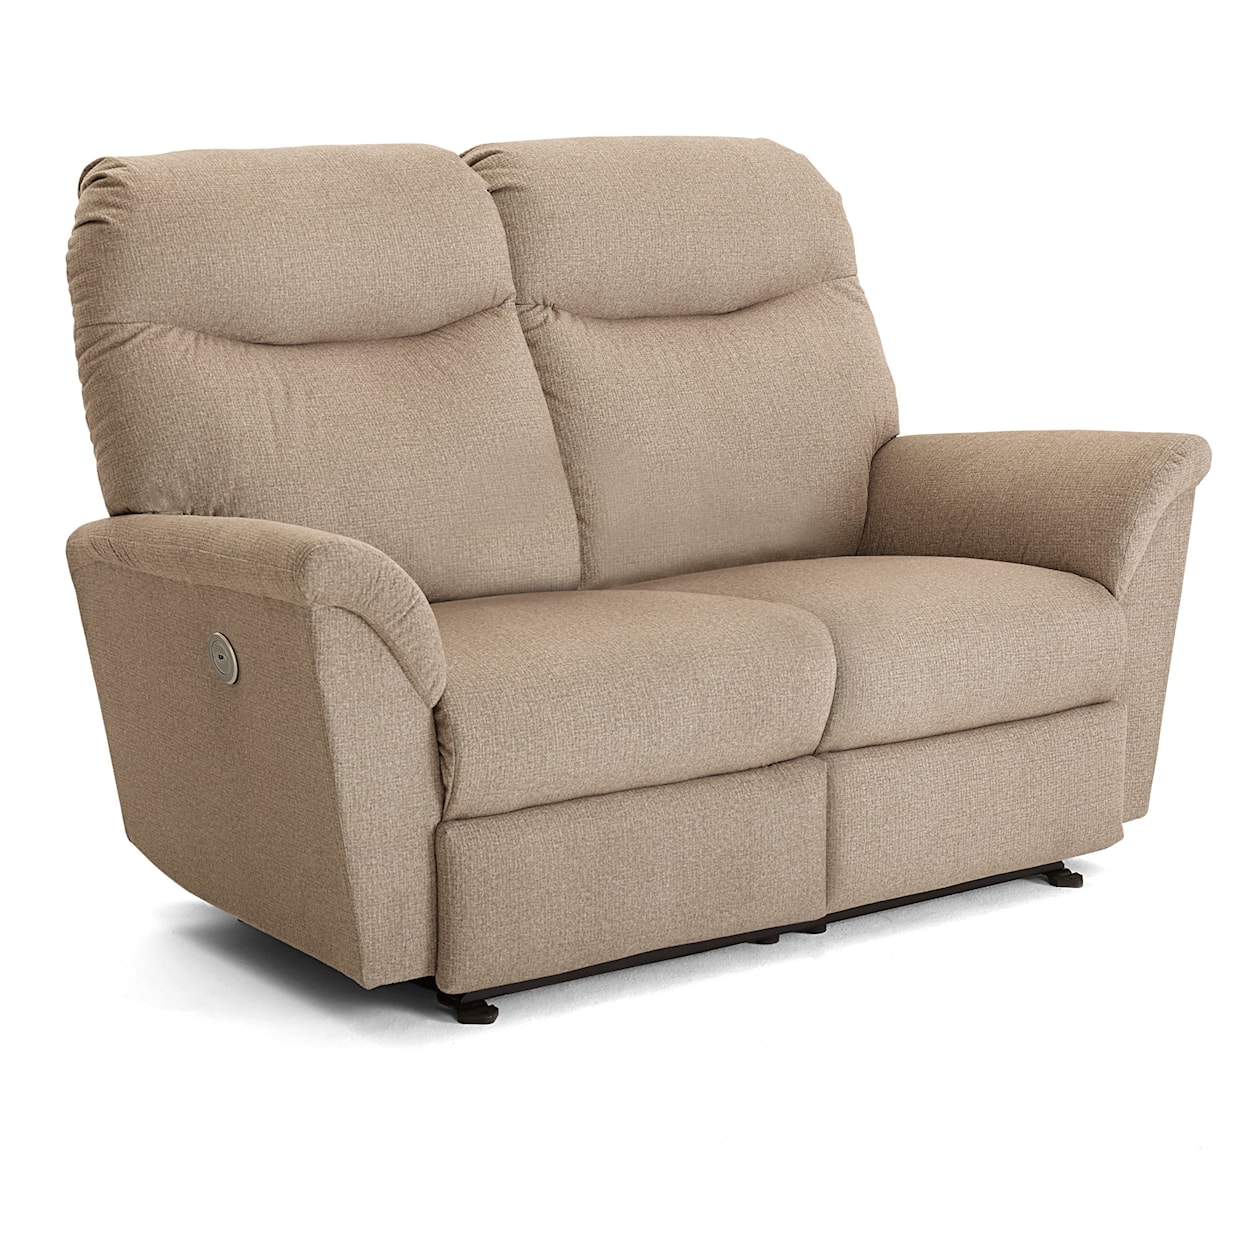 Best Home Furnishings Caitlin Reclining Space Saver Loveseat